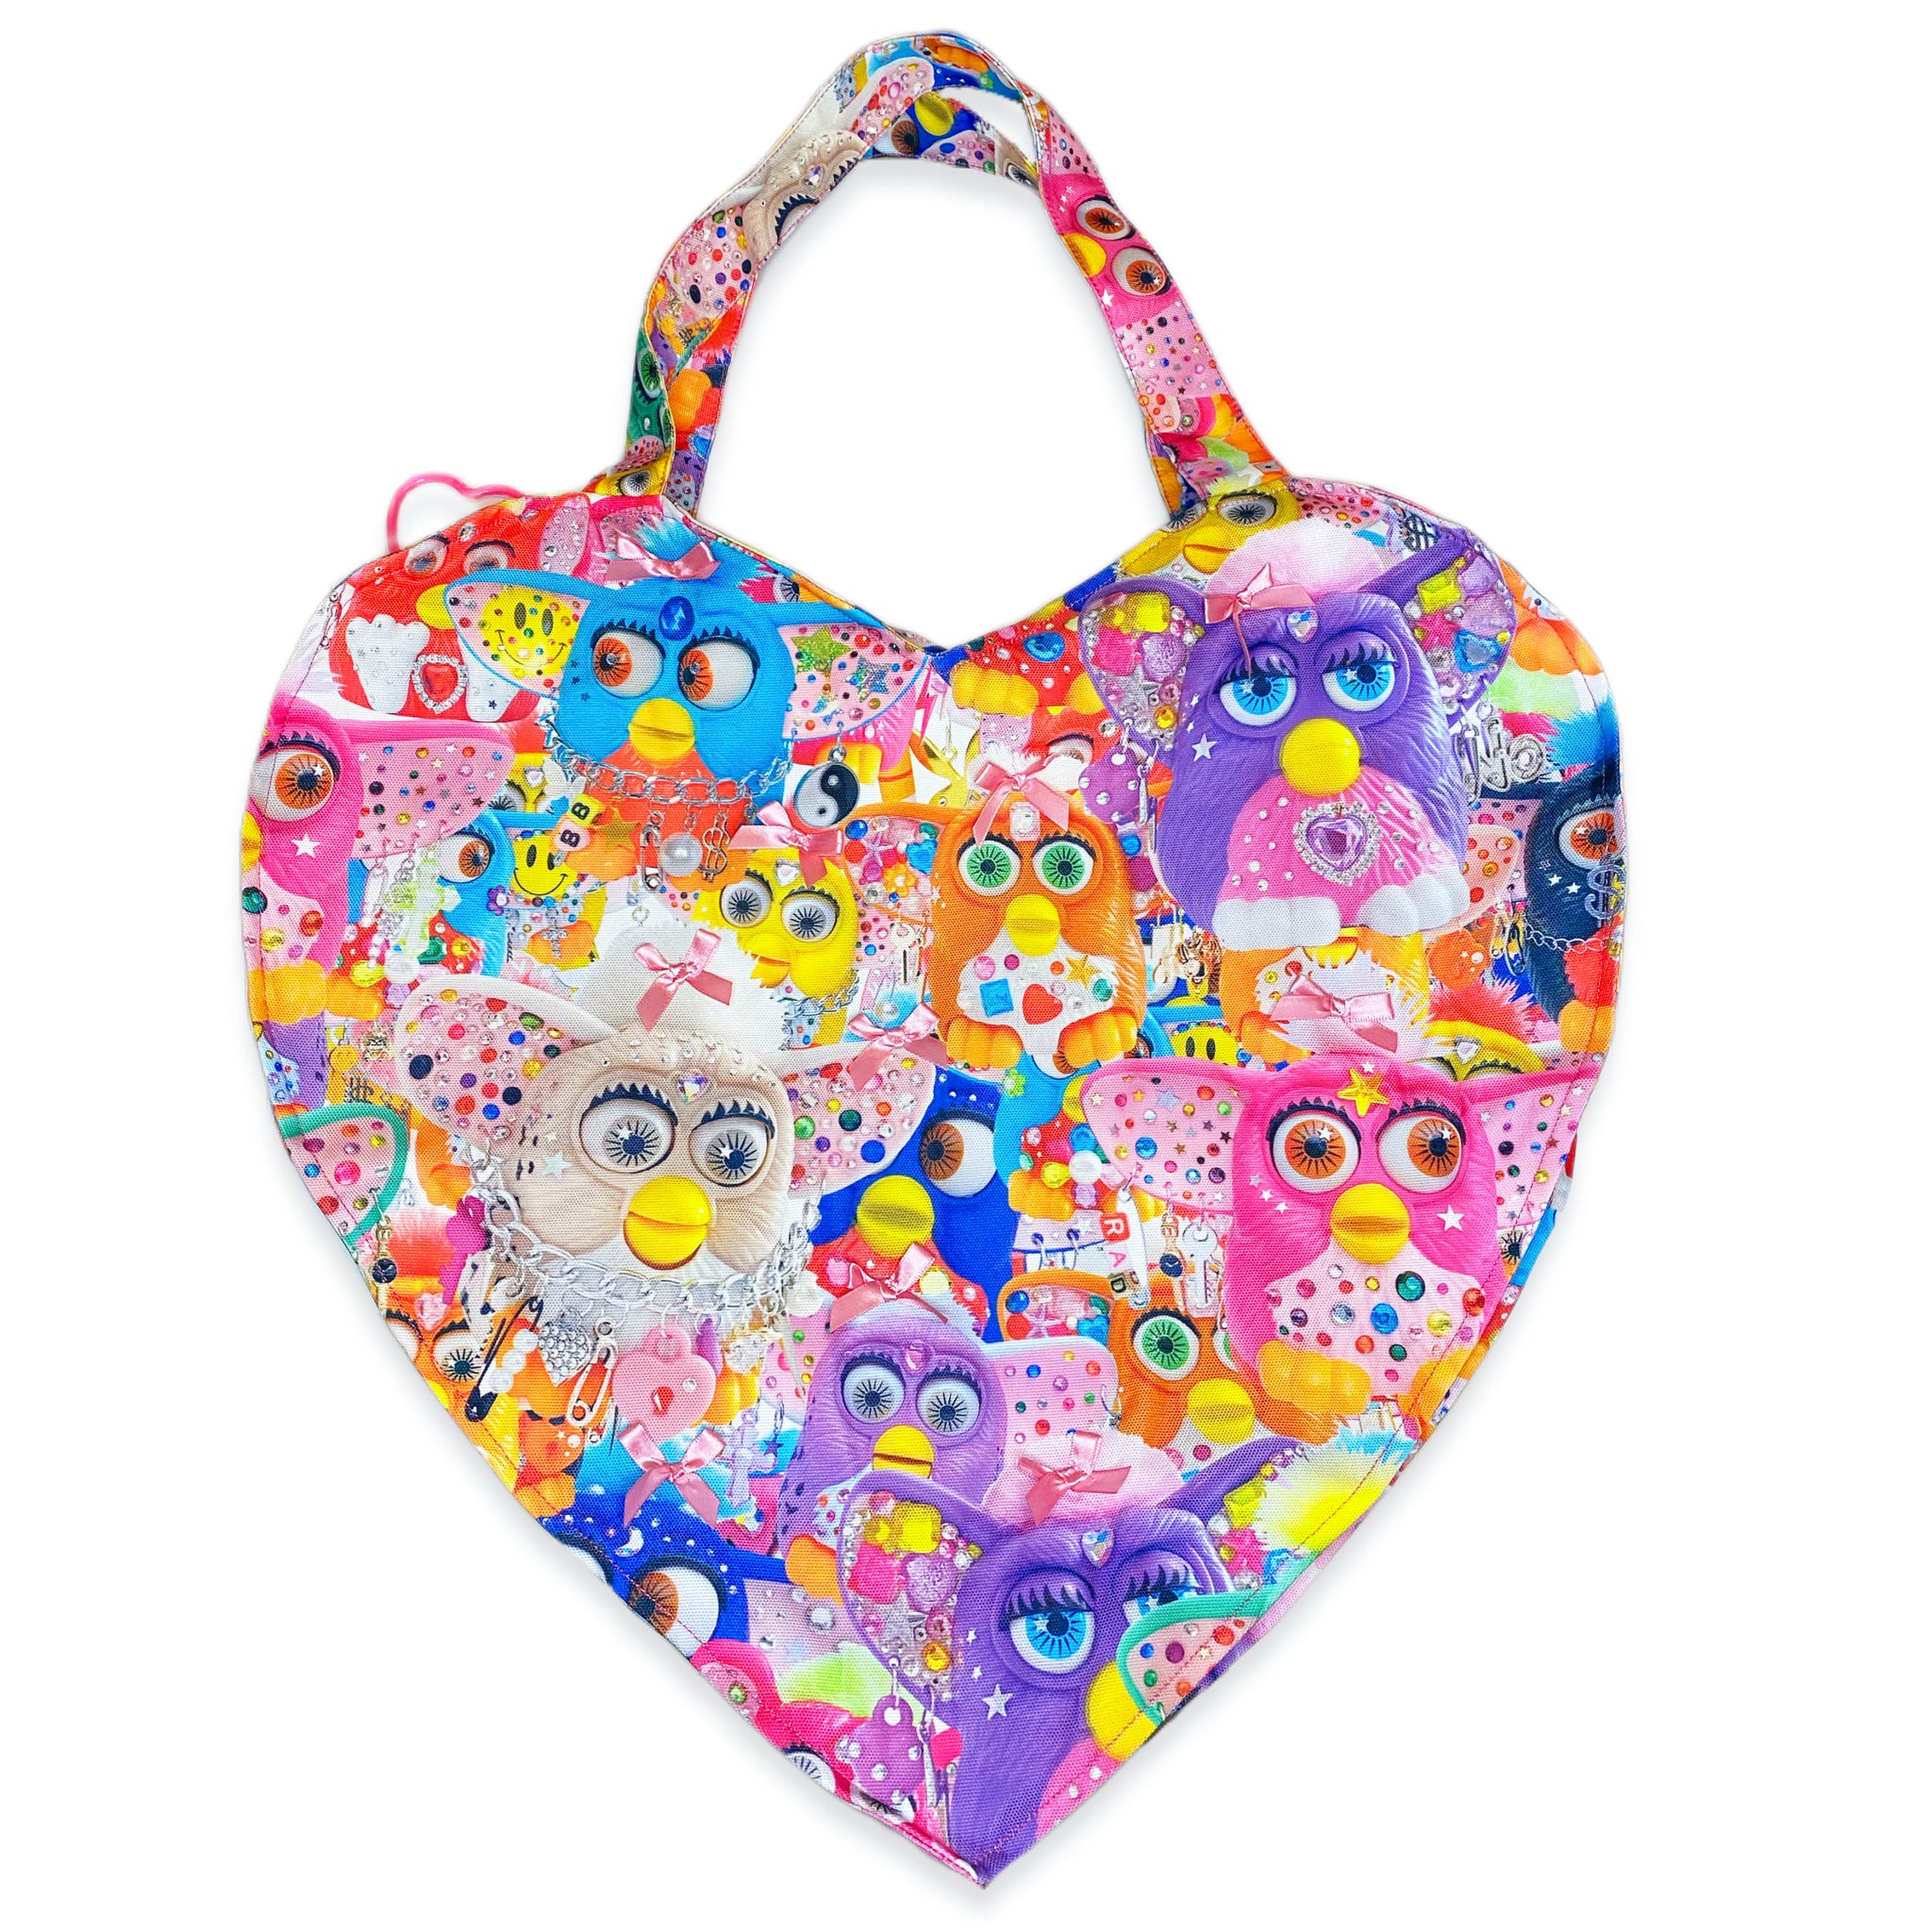 BEDAZZLED FURBY W/ PINK BOWS GIANT HEART BAG